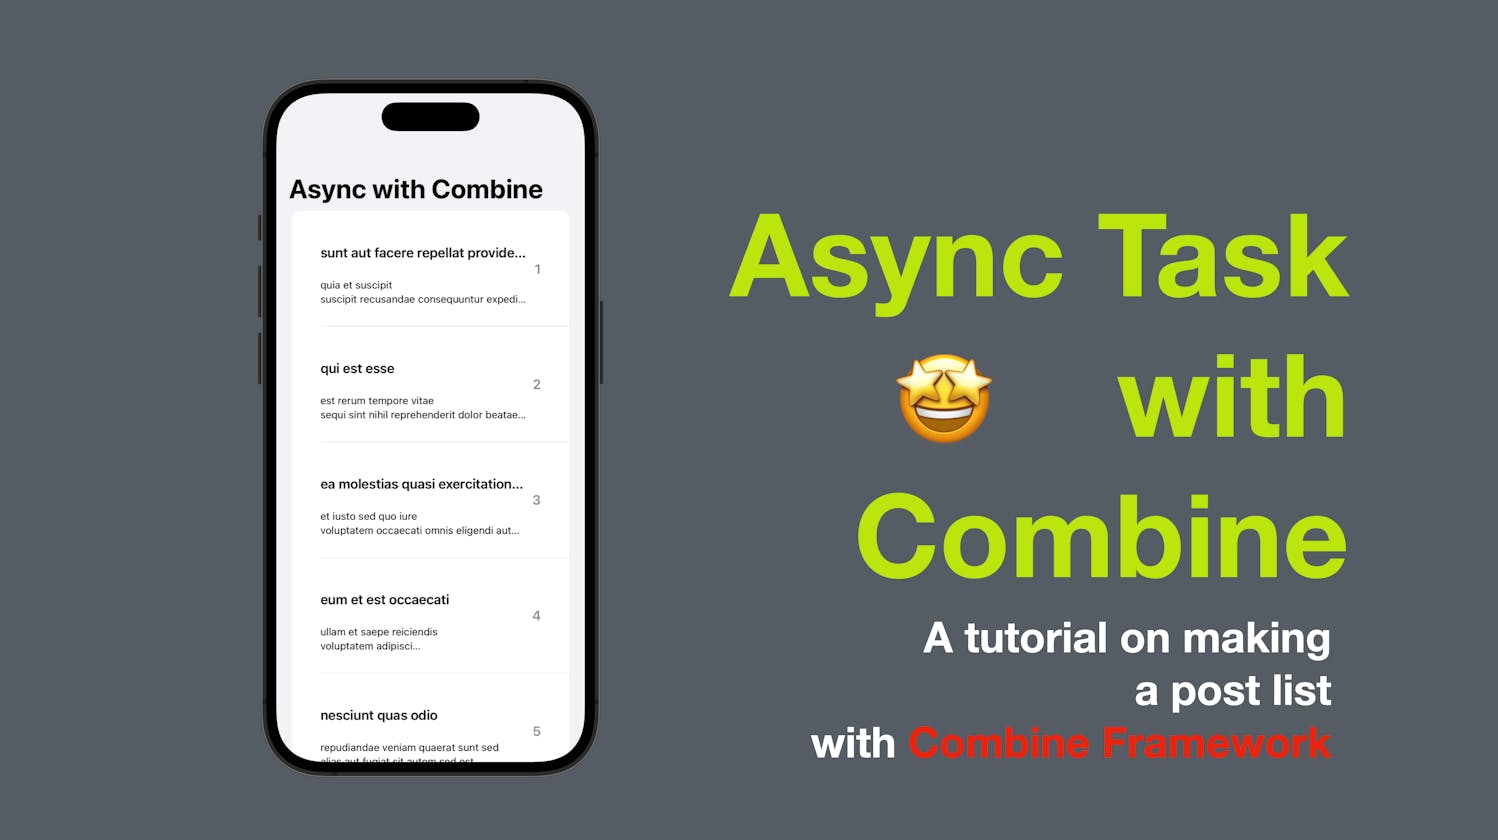 Async Task with Combine in SwiftUI